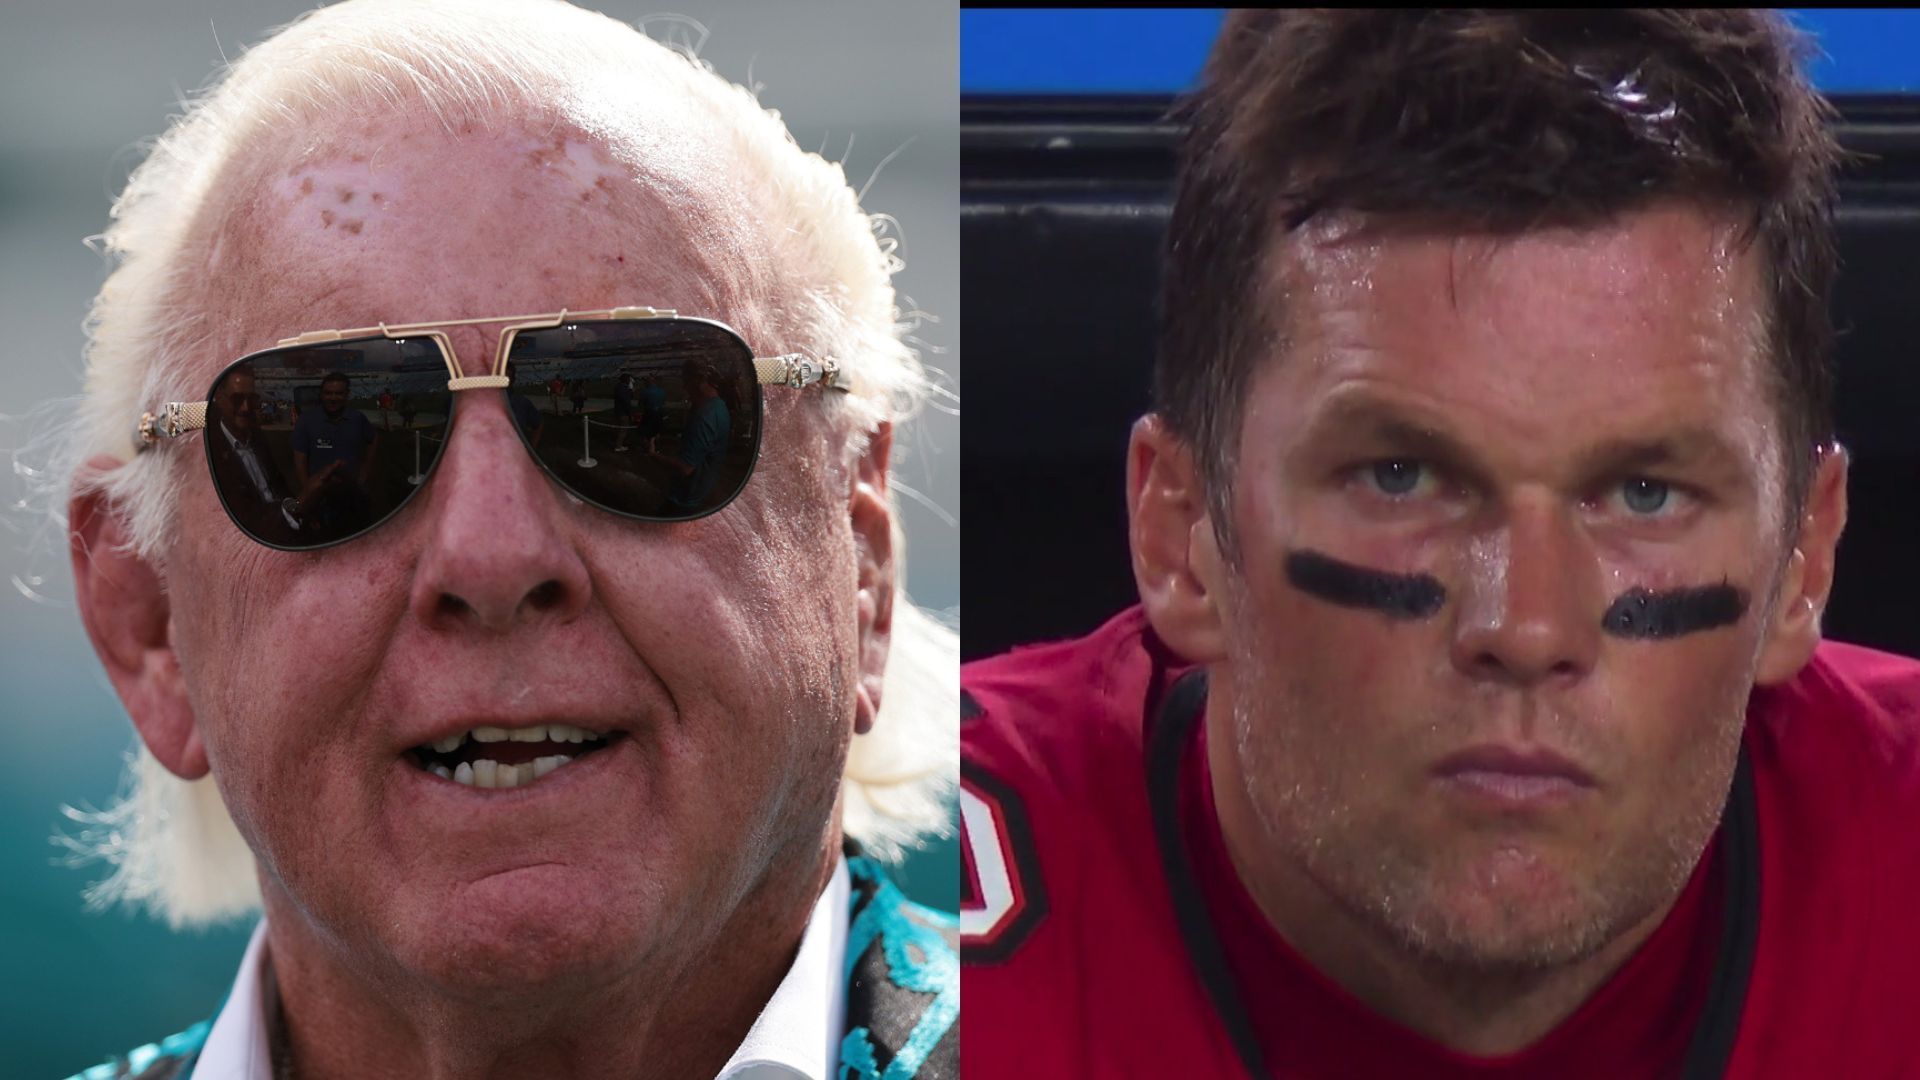 WWE legend Ric Flair defended Tom Brady today